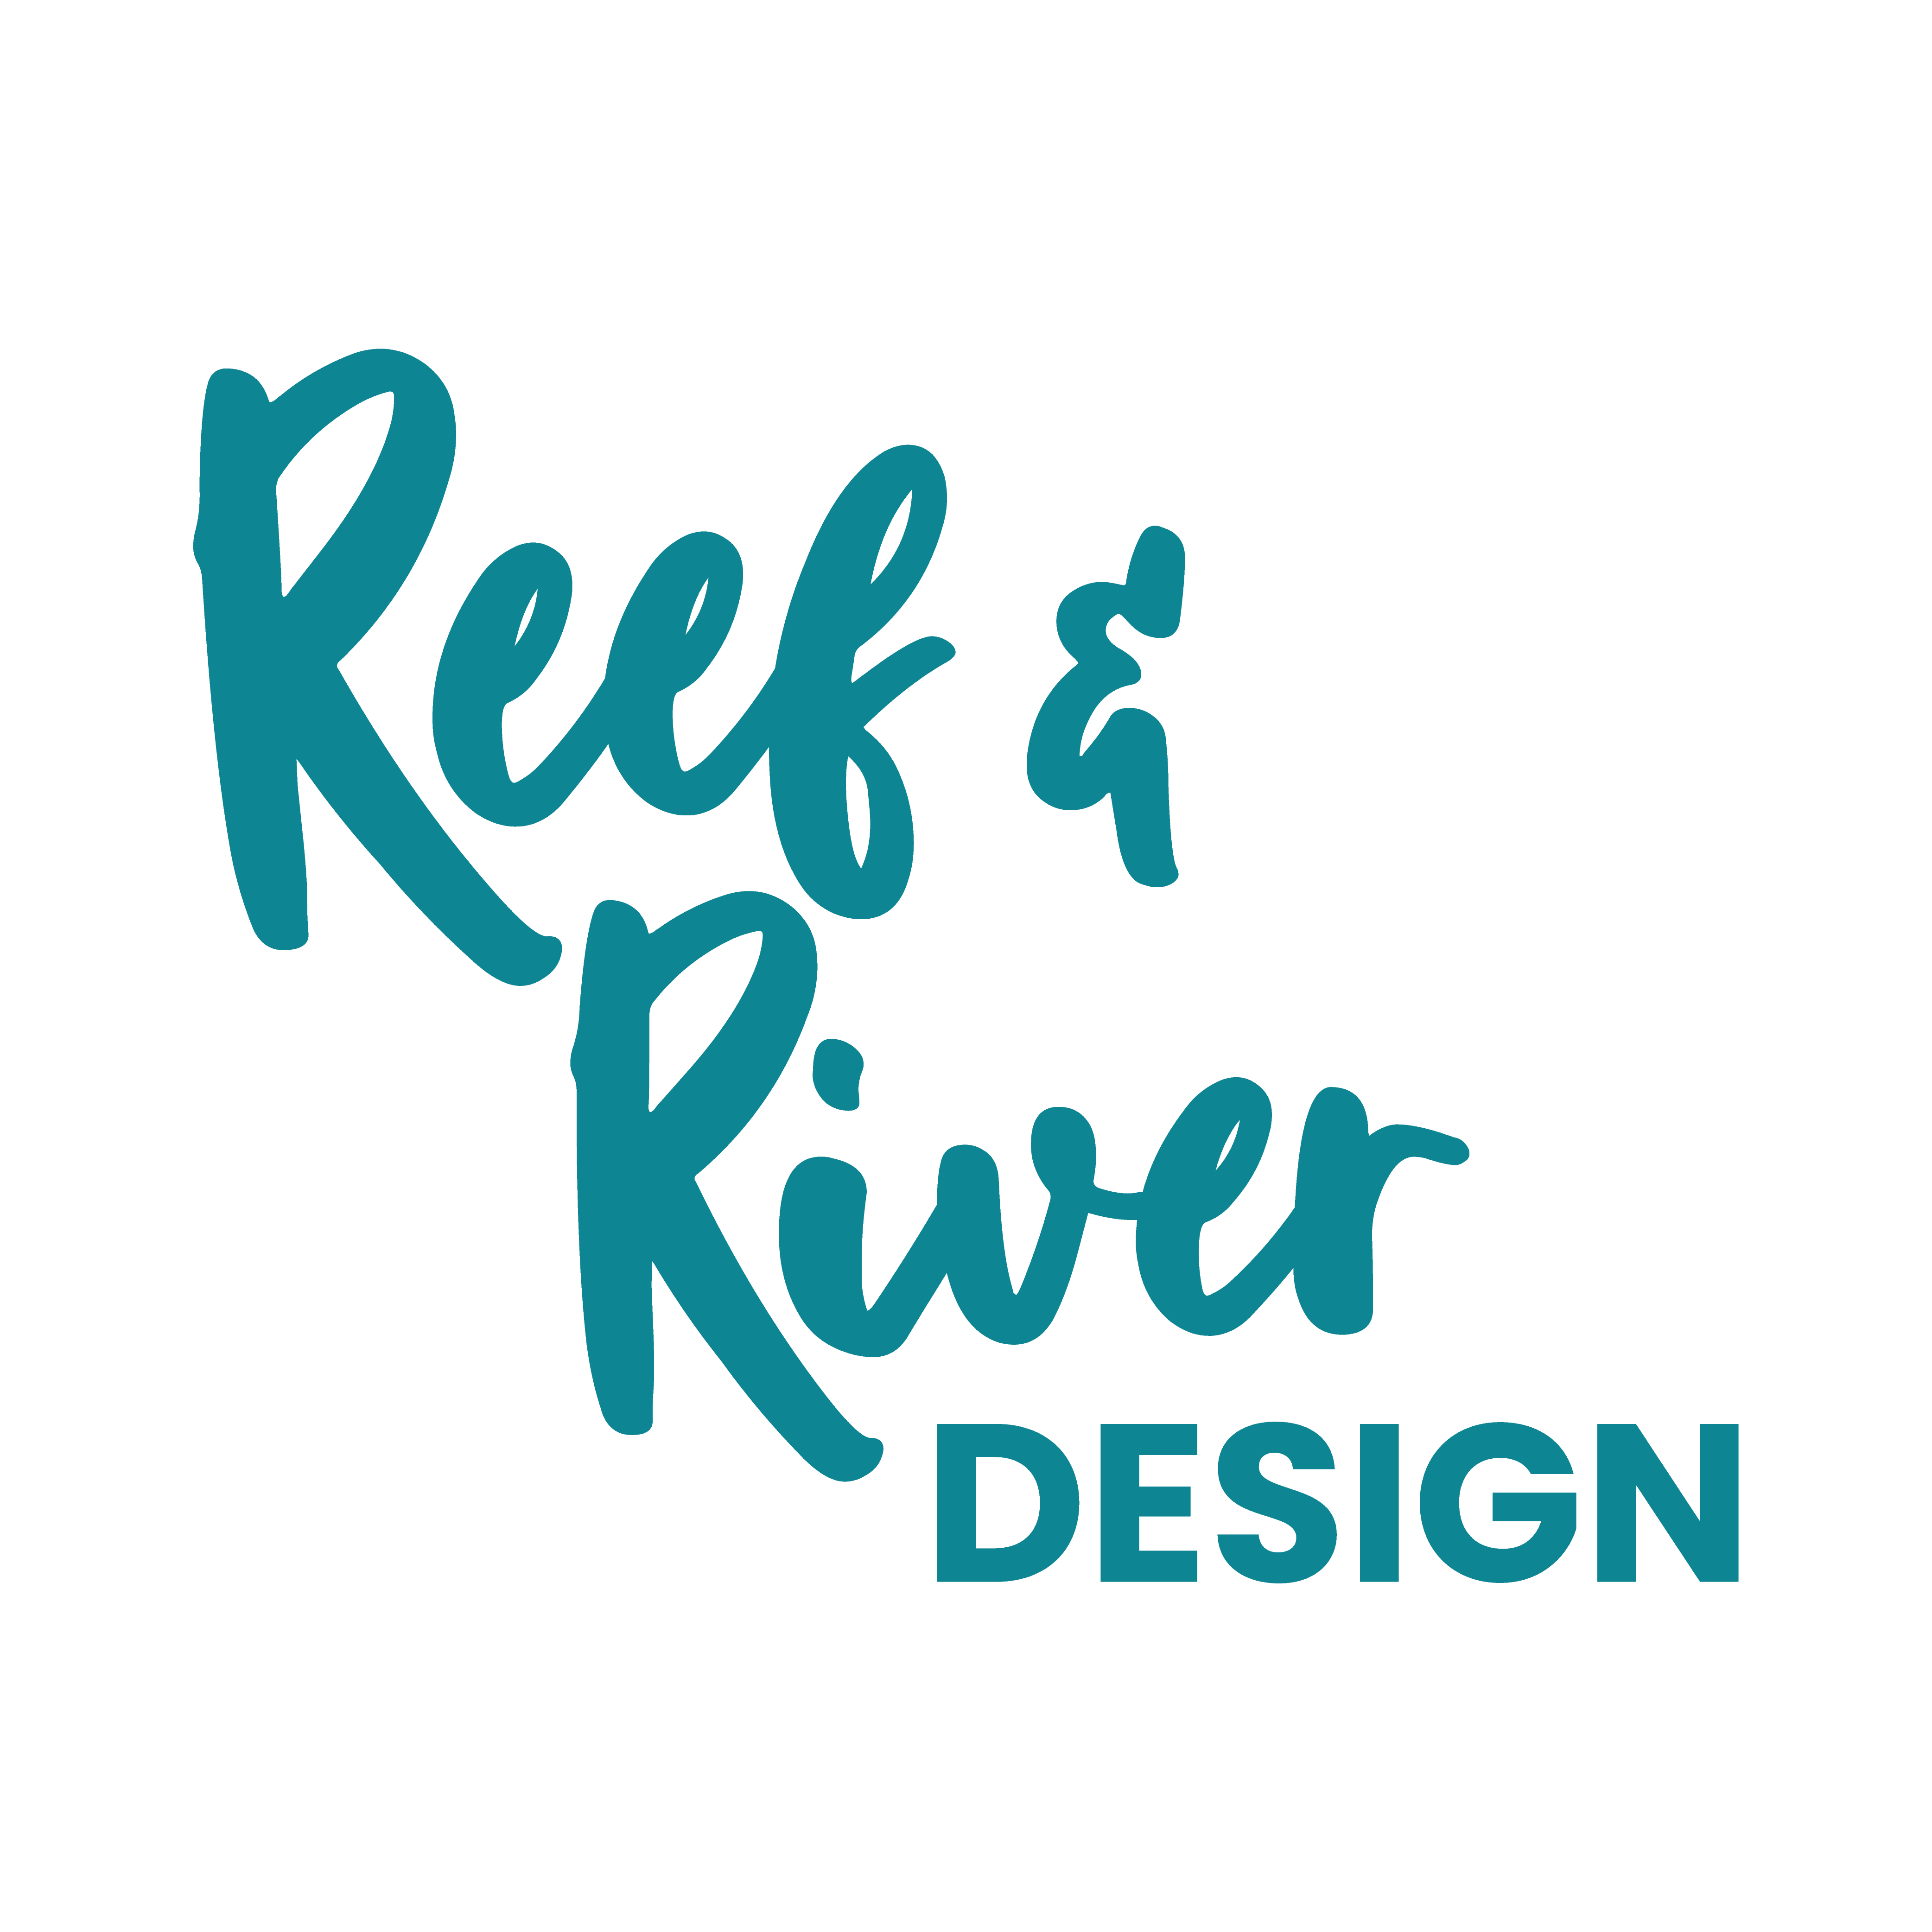 Reef and River Design